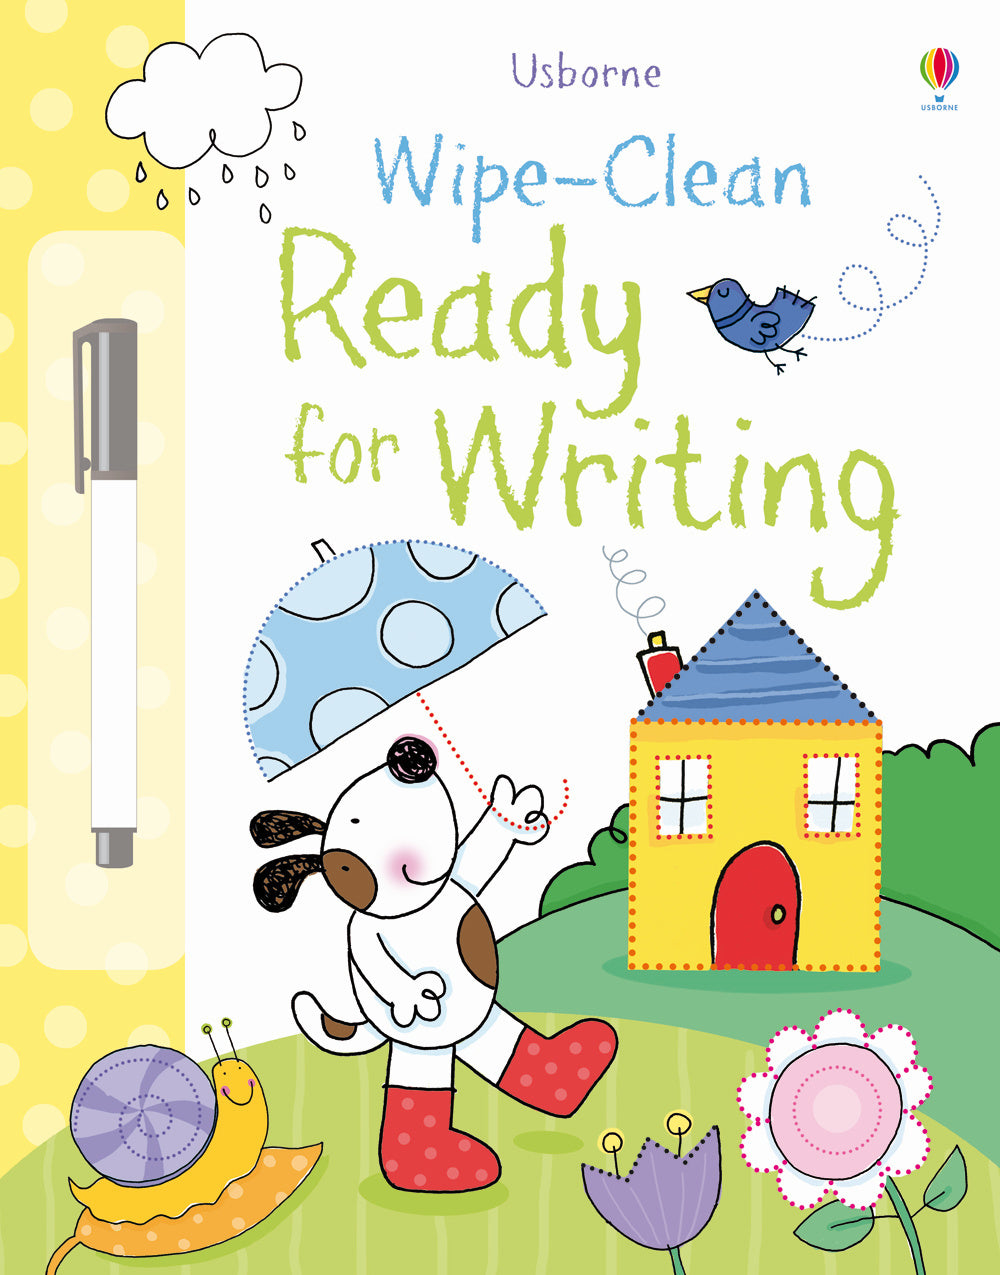 Wipe-clean ready for writing.